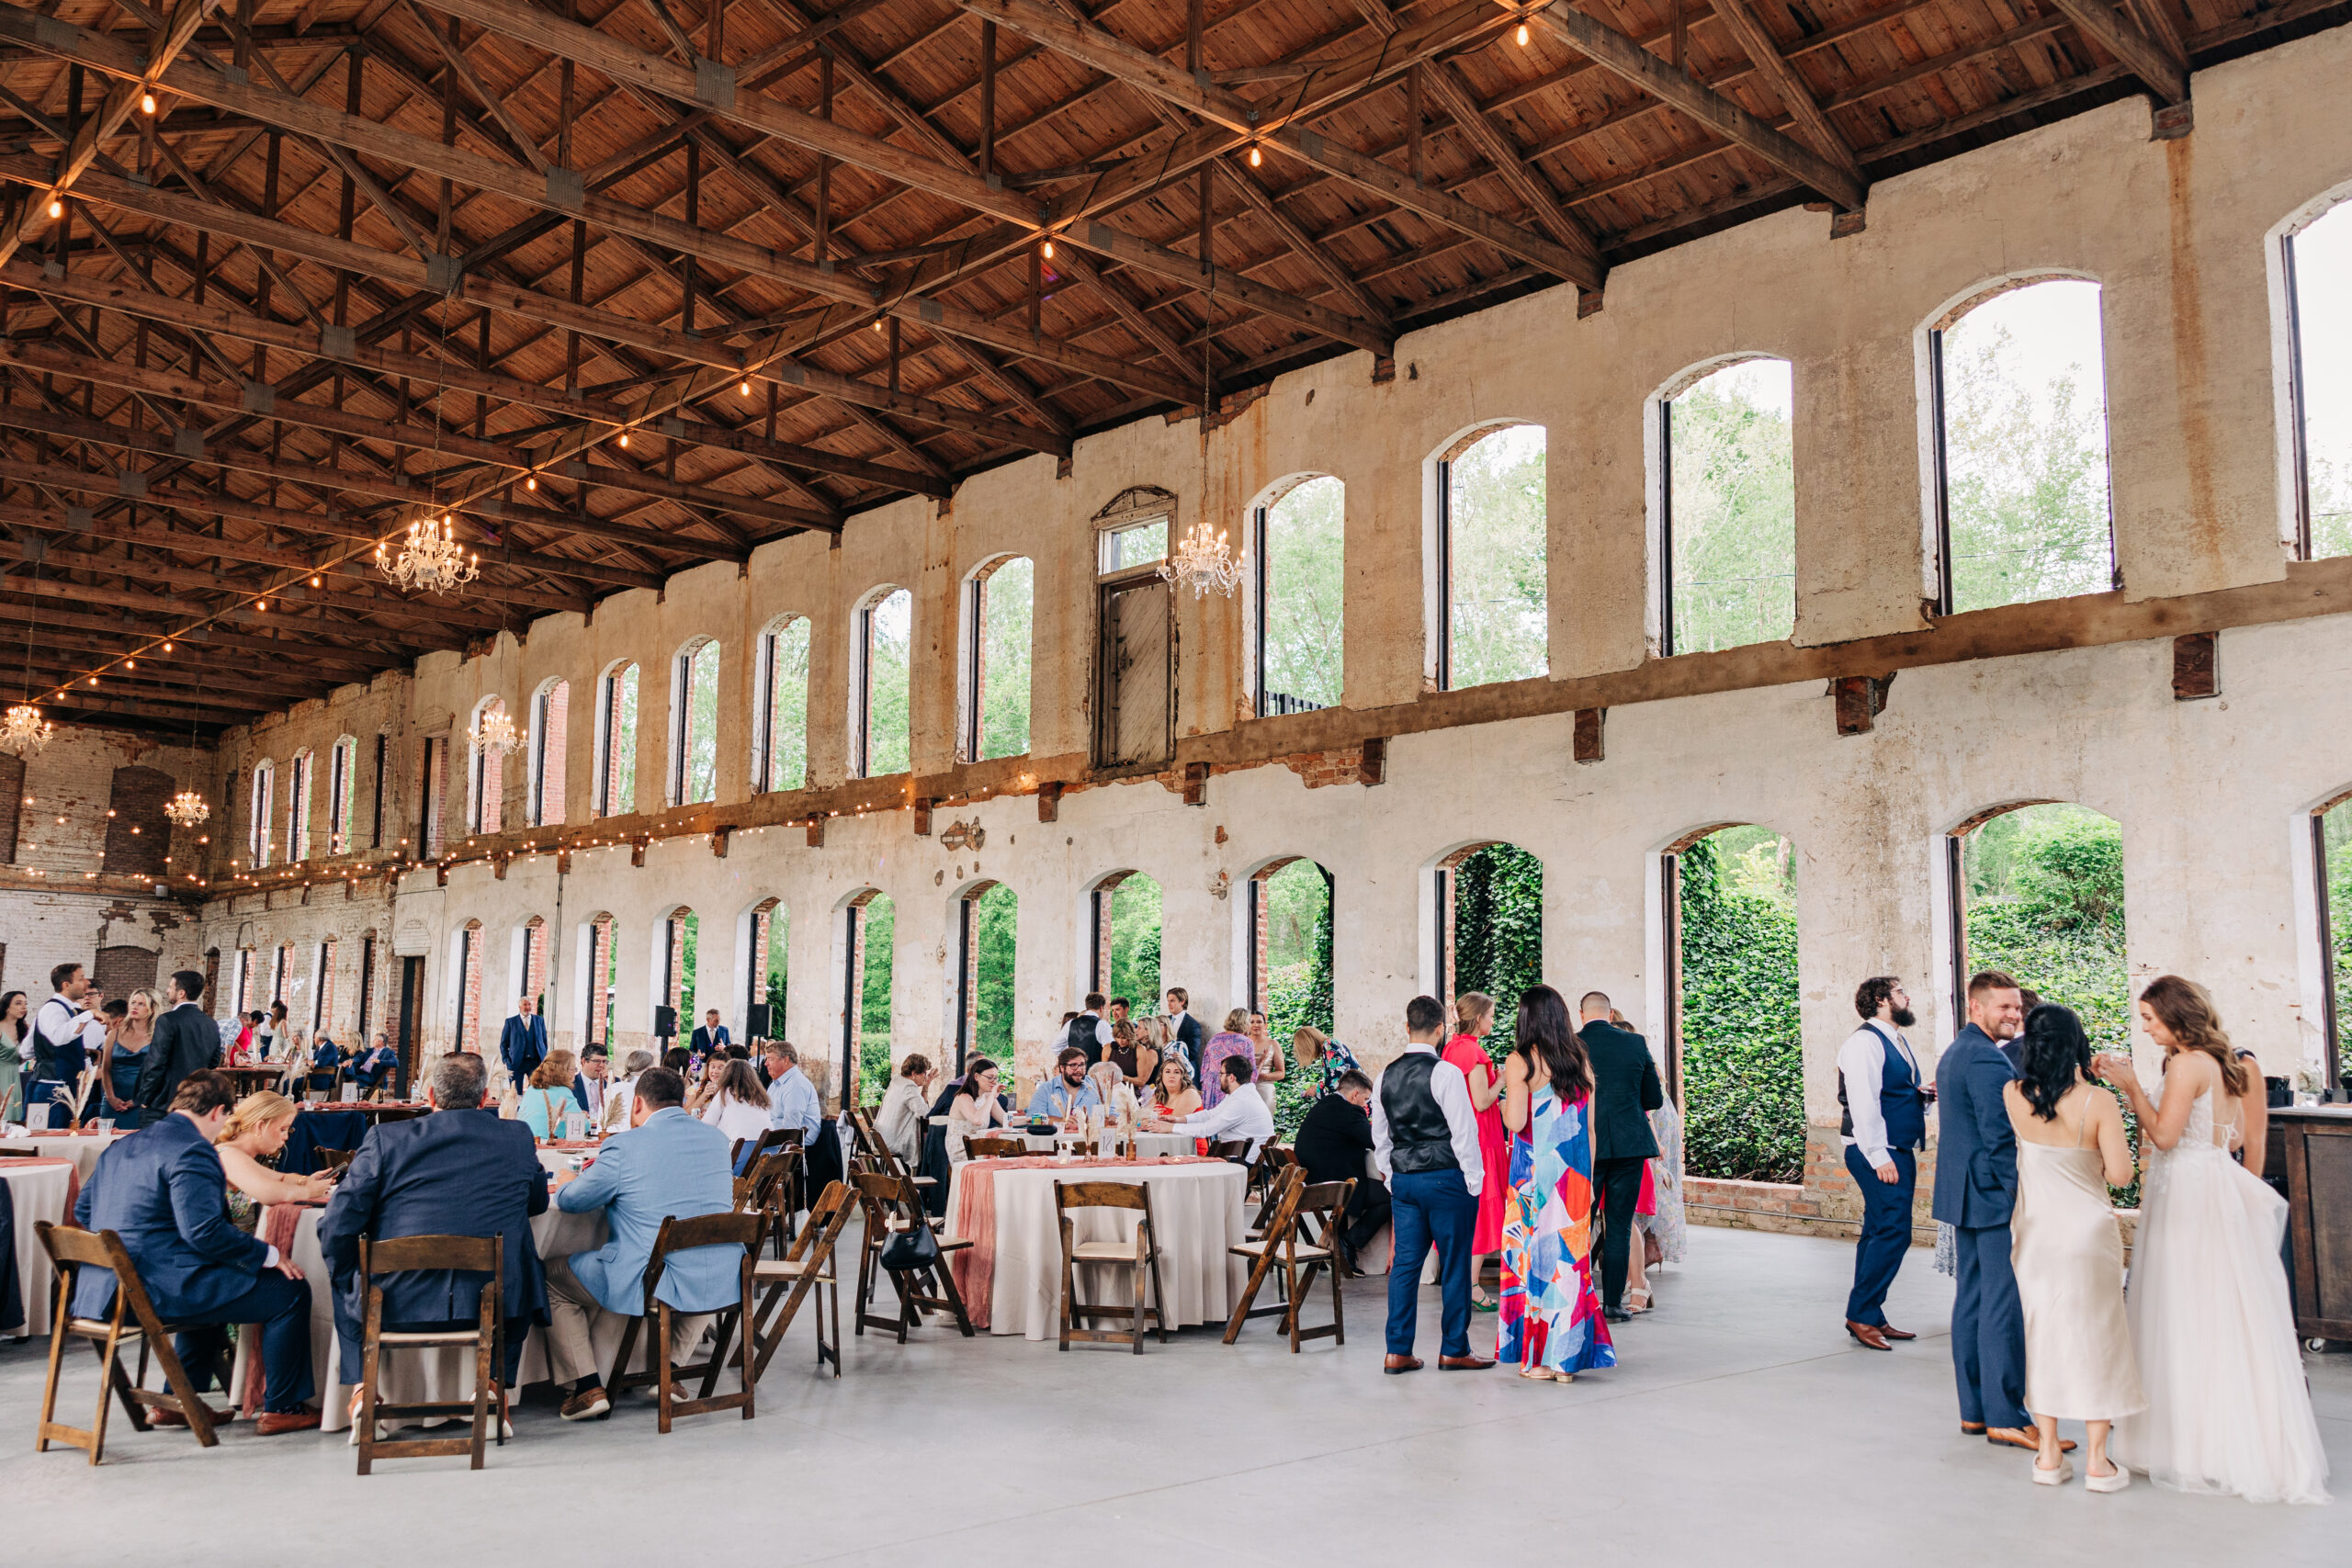 A view of an active wedding reception at the Providence Cotton Mill wedding venue